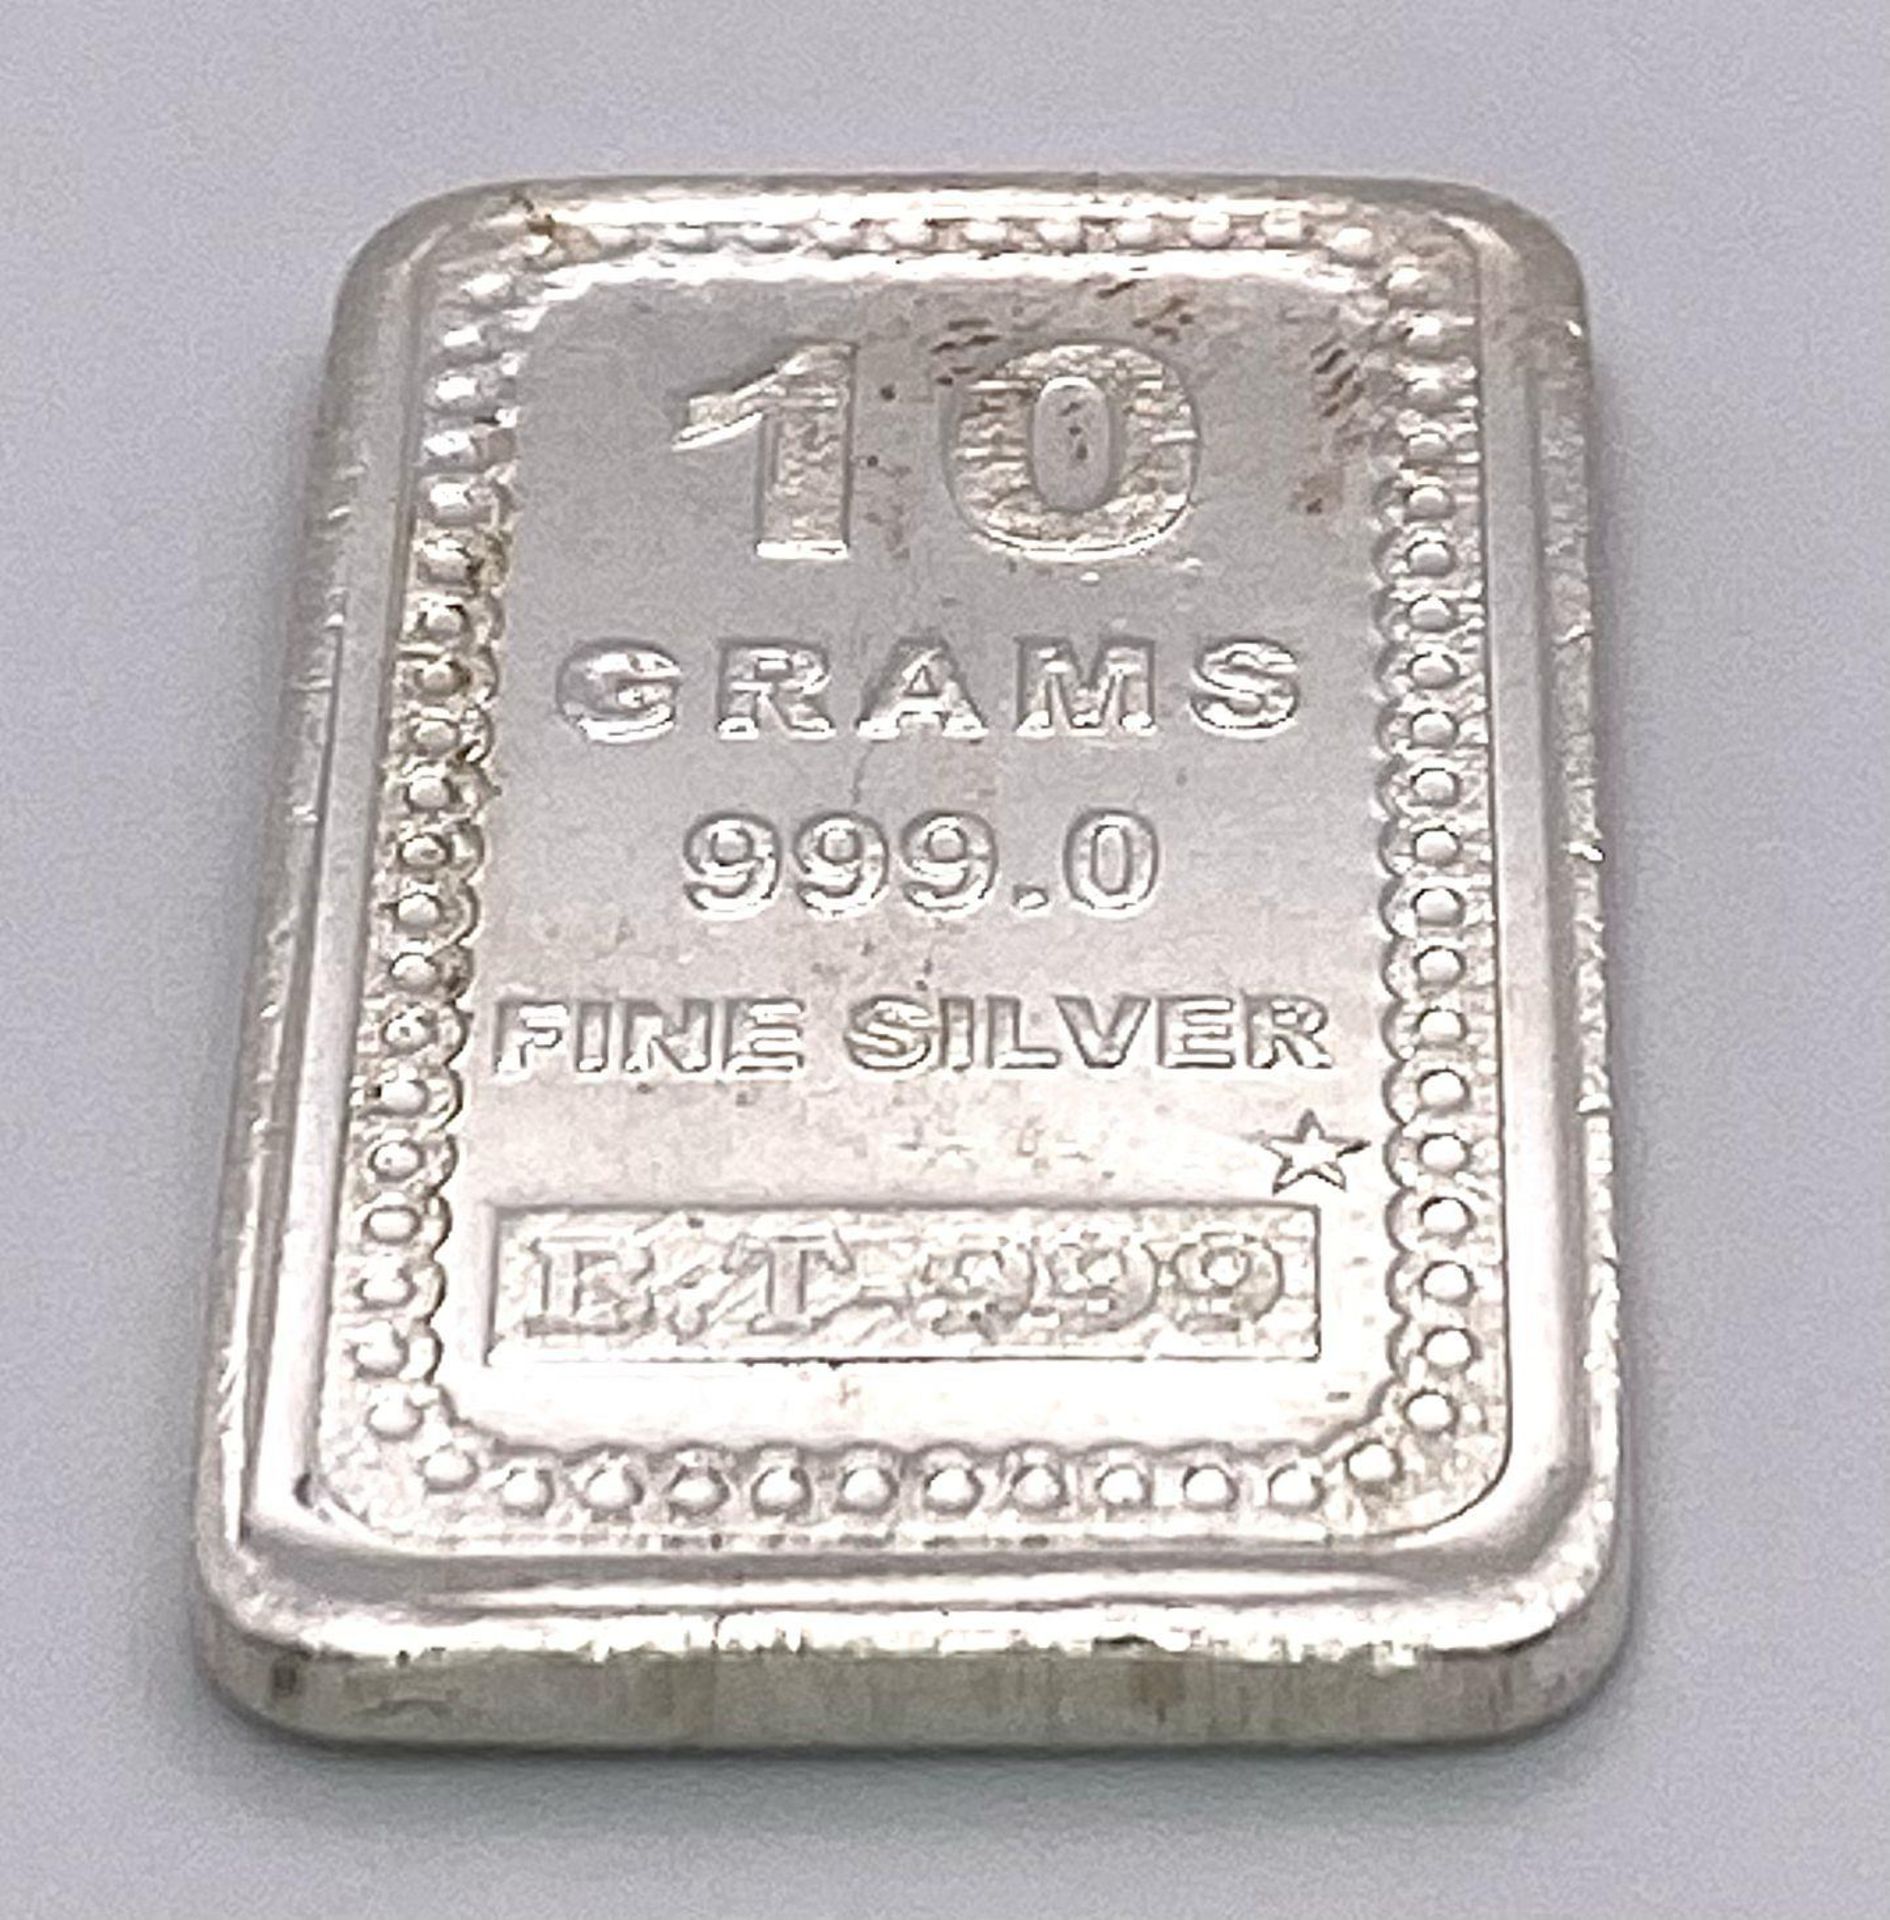 A 10G BAR OF FINE SILVER 999.0 Ref: SC 7010 - Image 2 of 3